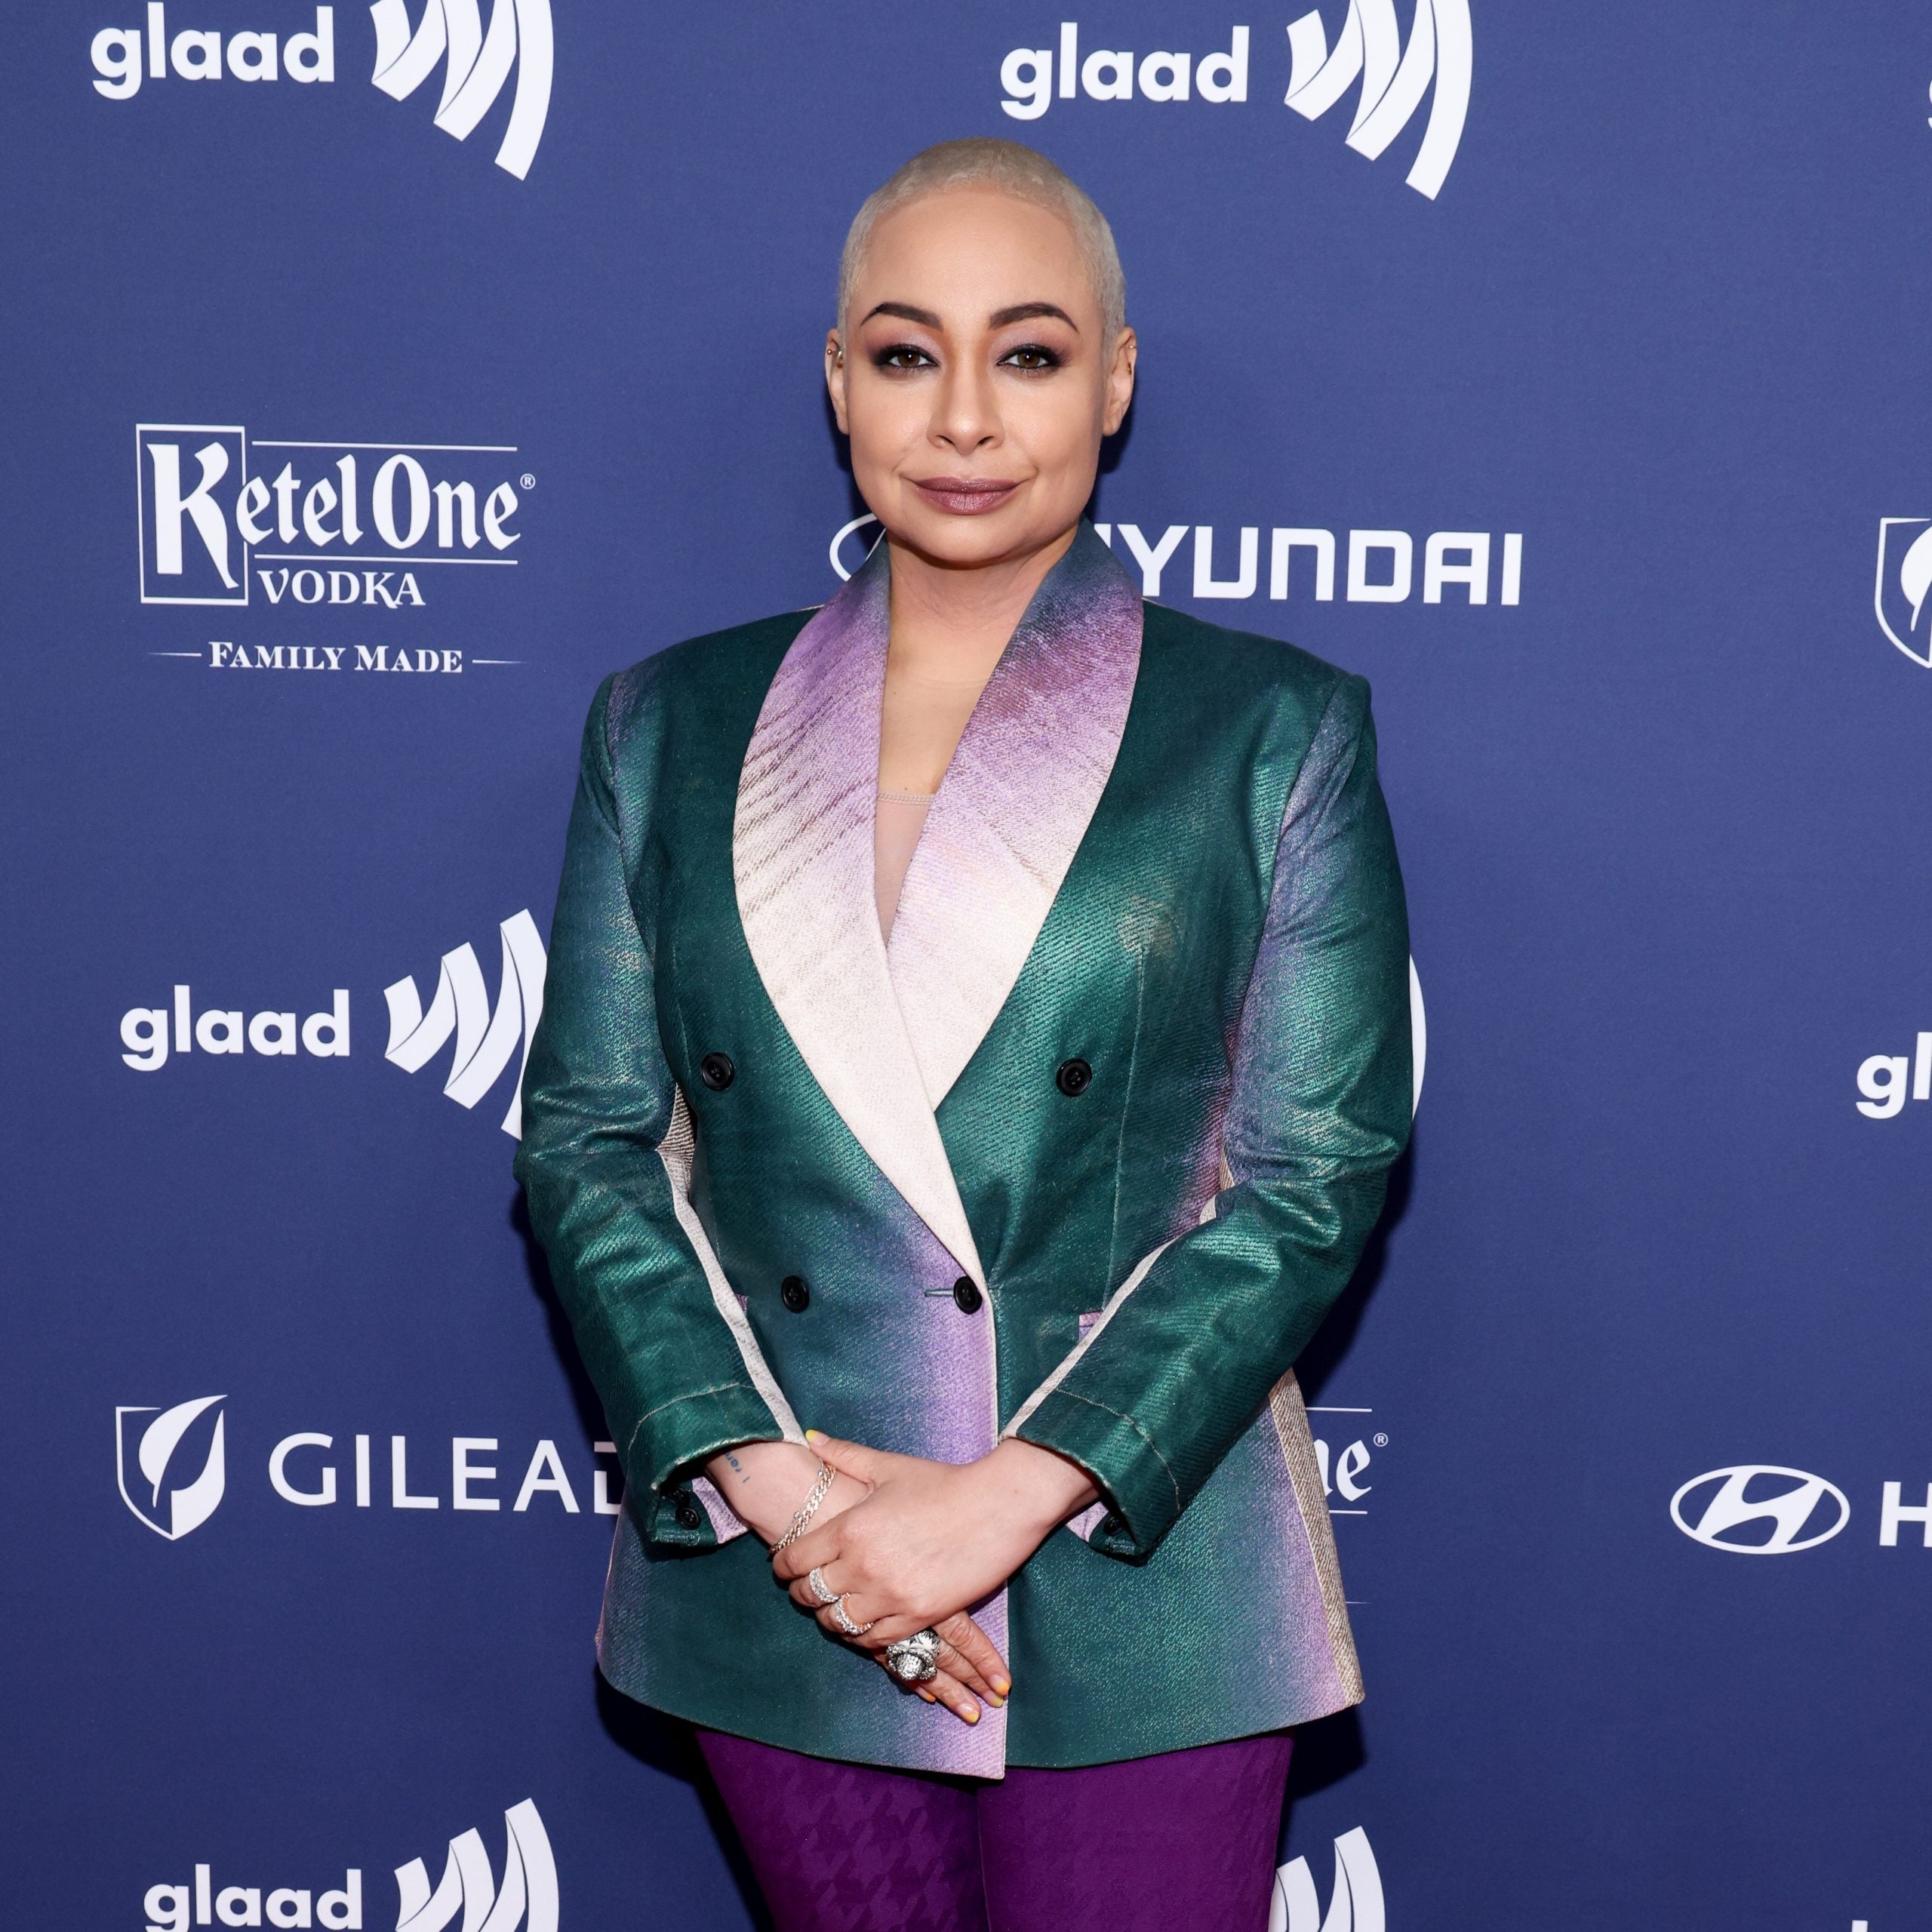 Raven-Symoné Shares The Death of Her Younger Brother Blaize After Colon Cancer Diagnosis